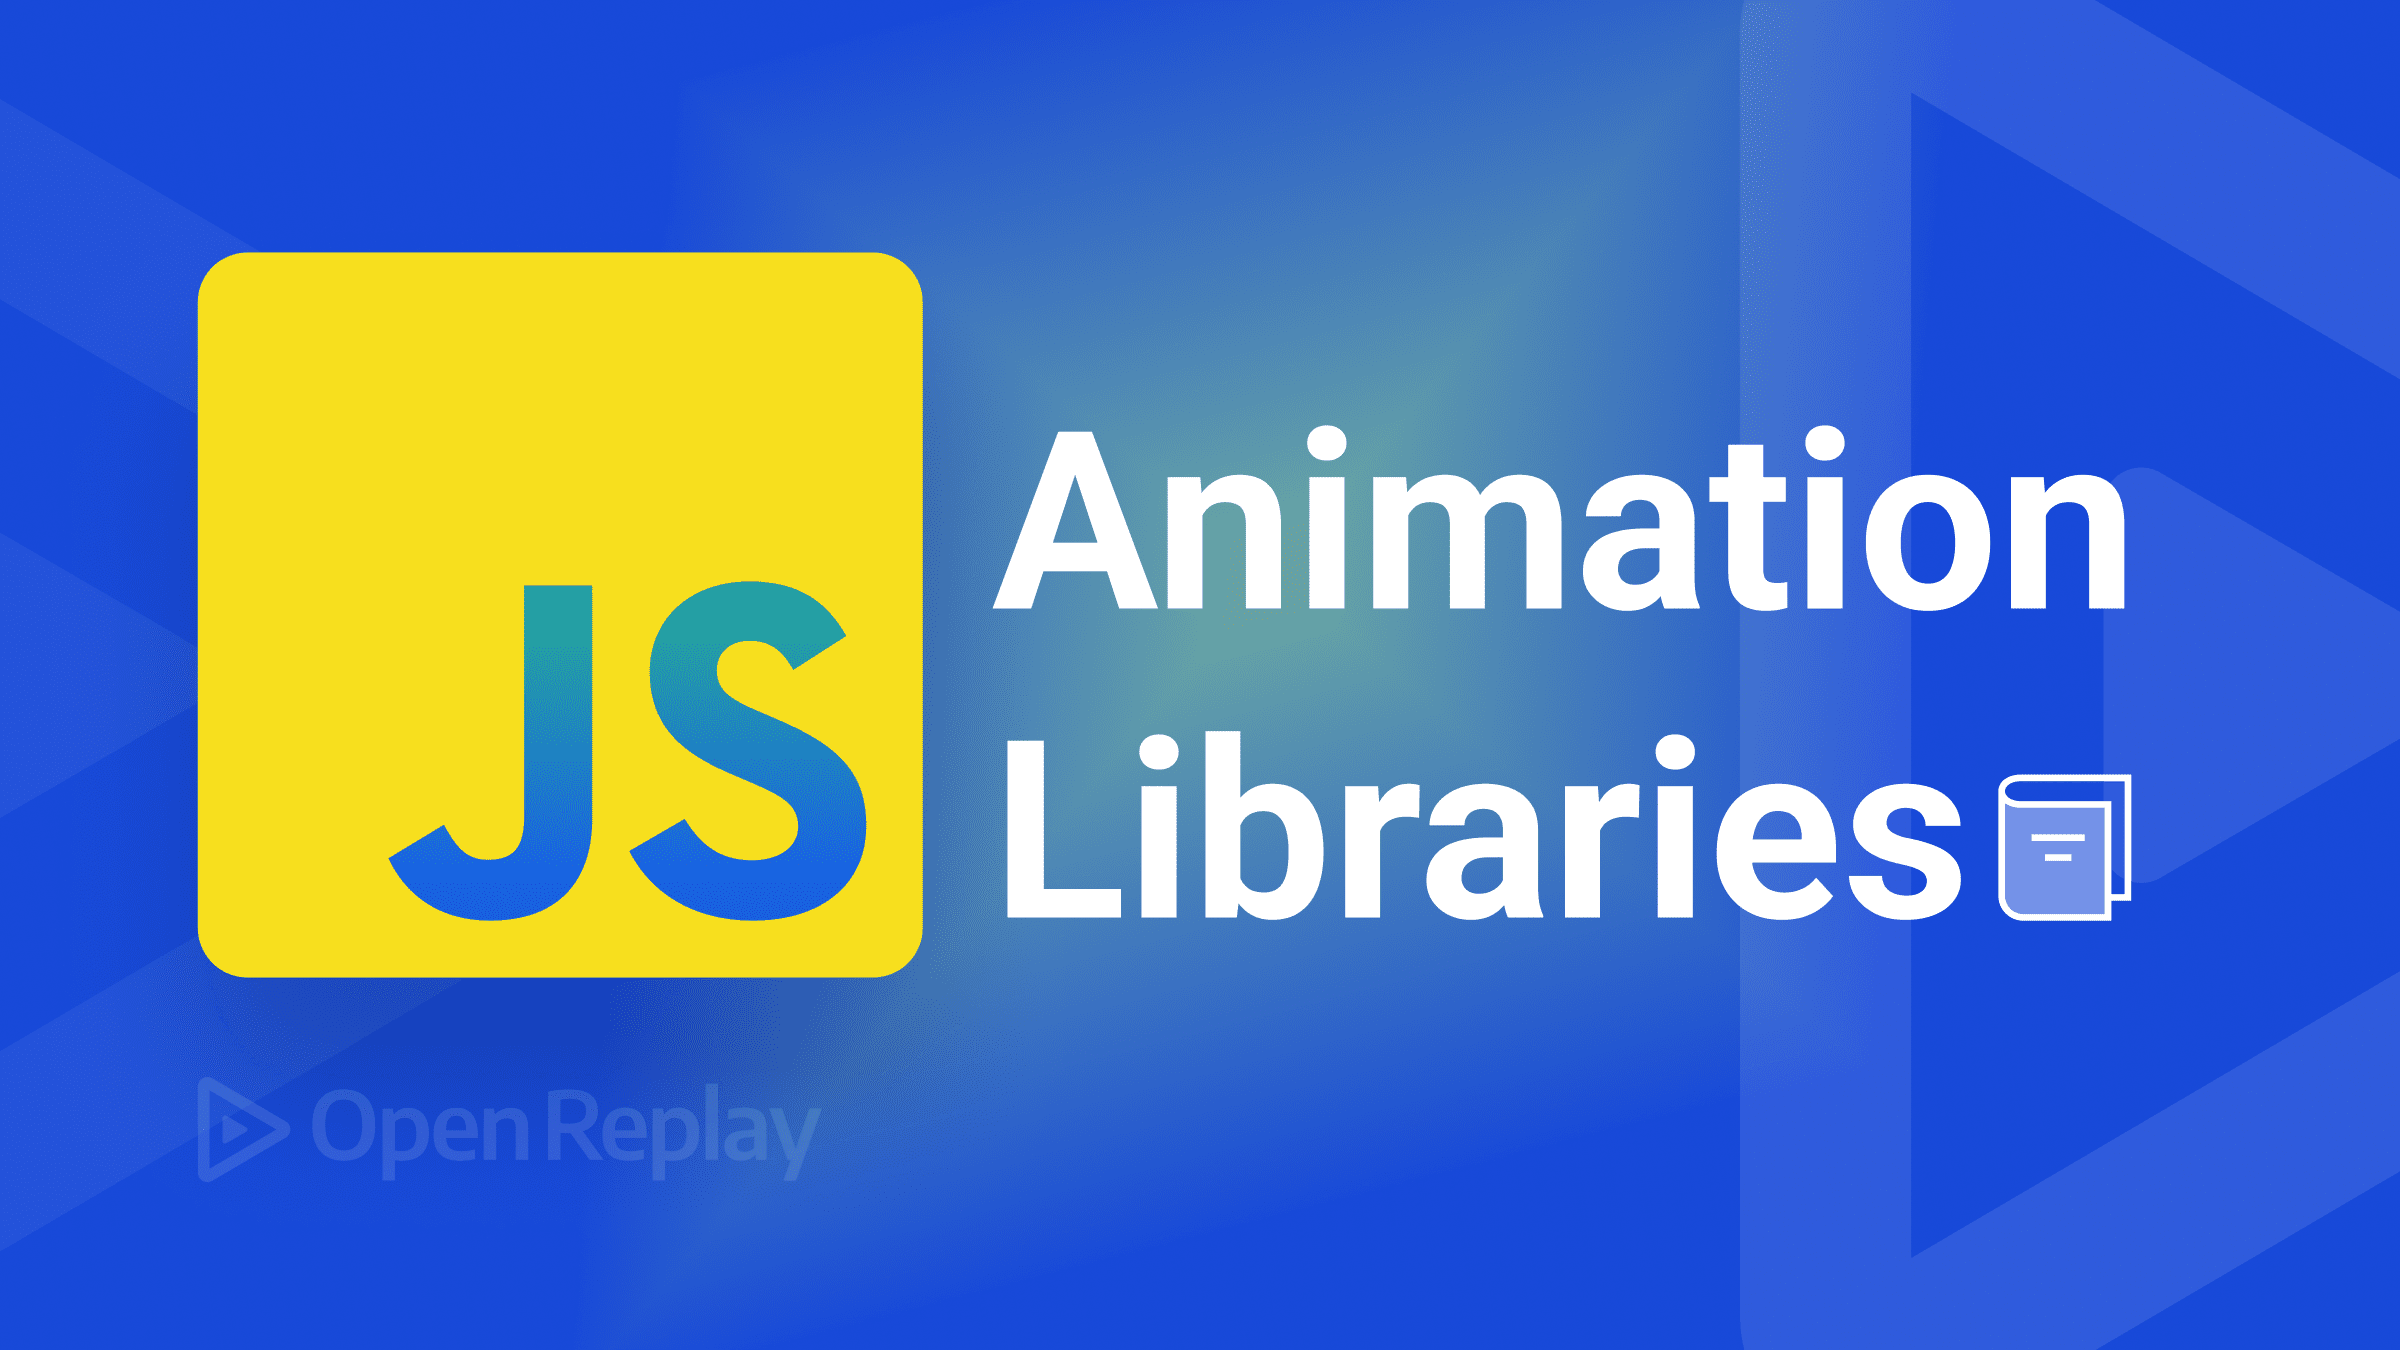 Five JavaScript Animation Libraries to try out